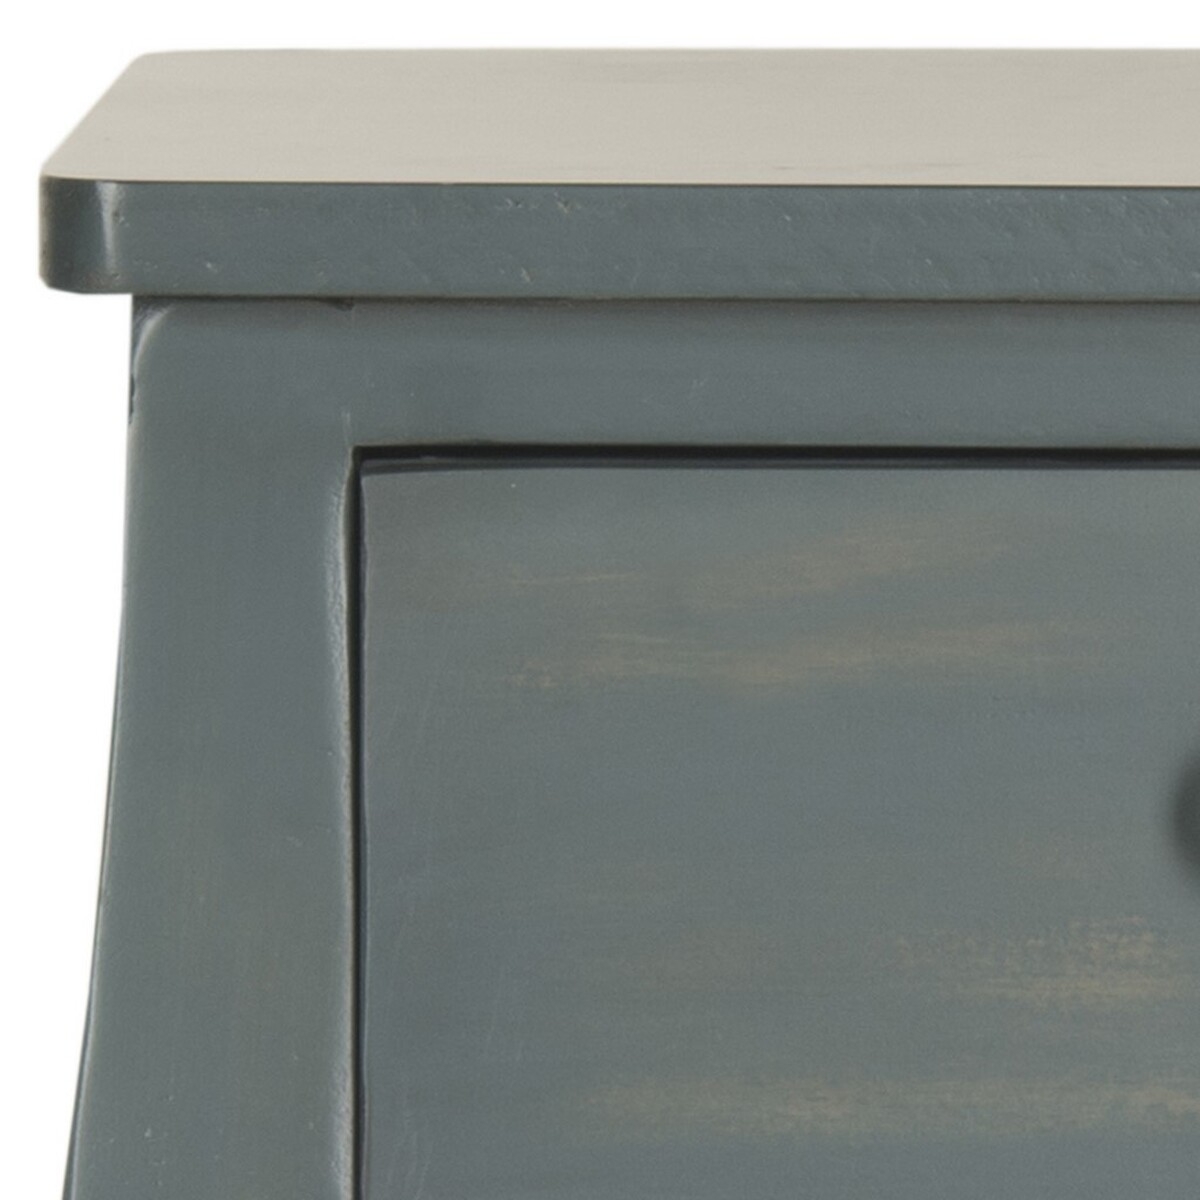 Thelma End Table With Storage Drawer - Steel Teal - Arlo Home - Image 2